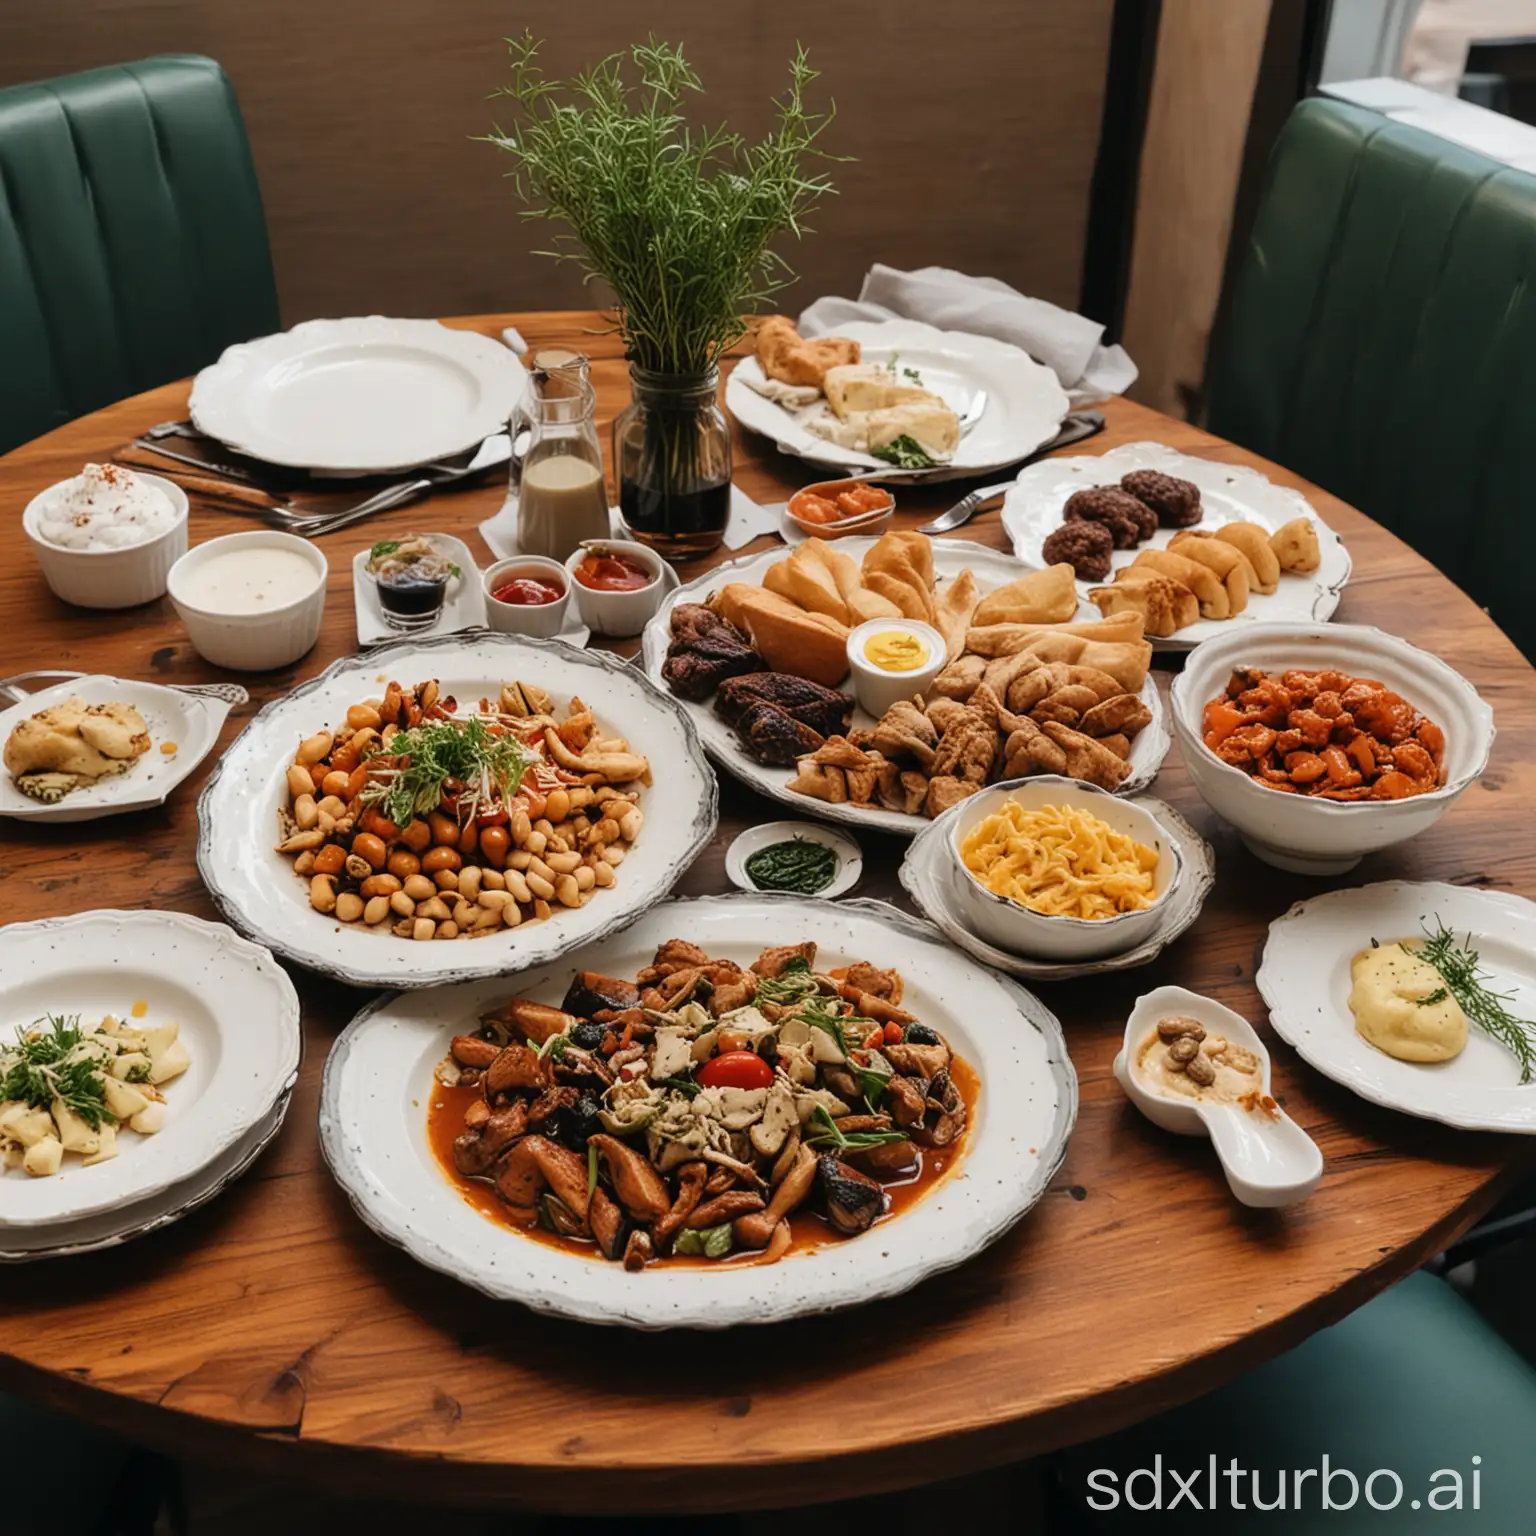 Delicious-Plate-of-Food-on-Restaurant-Table